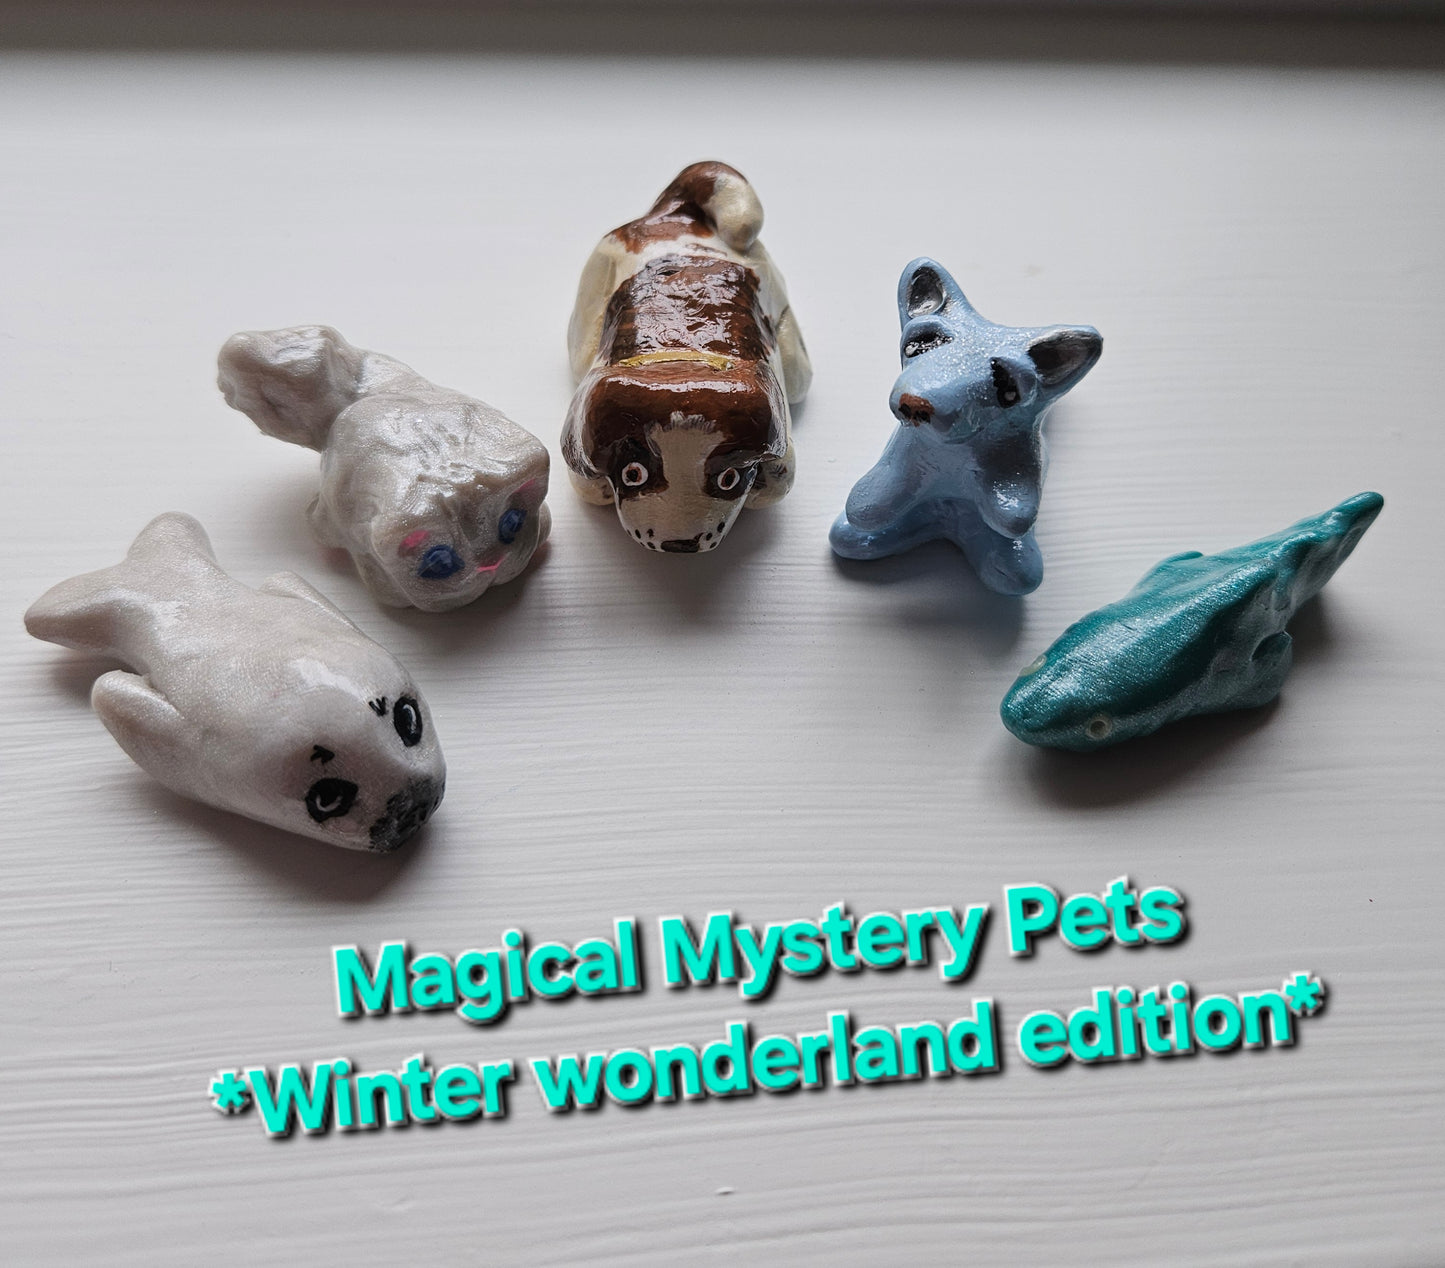 Magical Mystery Scoop (Mystery pet included)